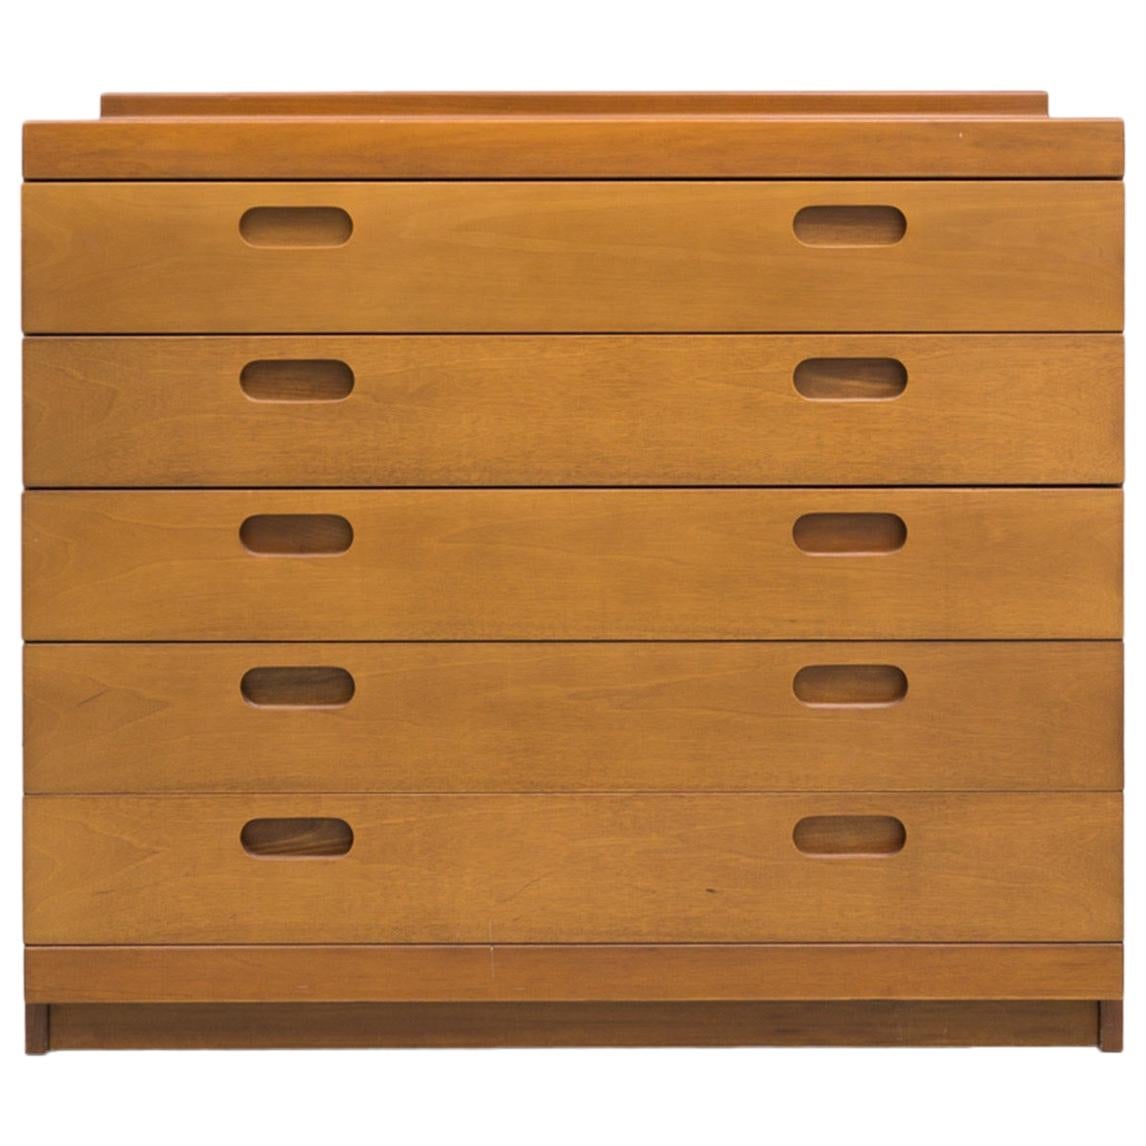 Chest of Drawers, Walnut, by Tito Agnoli, 1968 For Sale